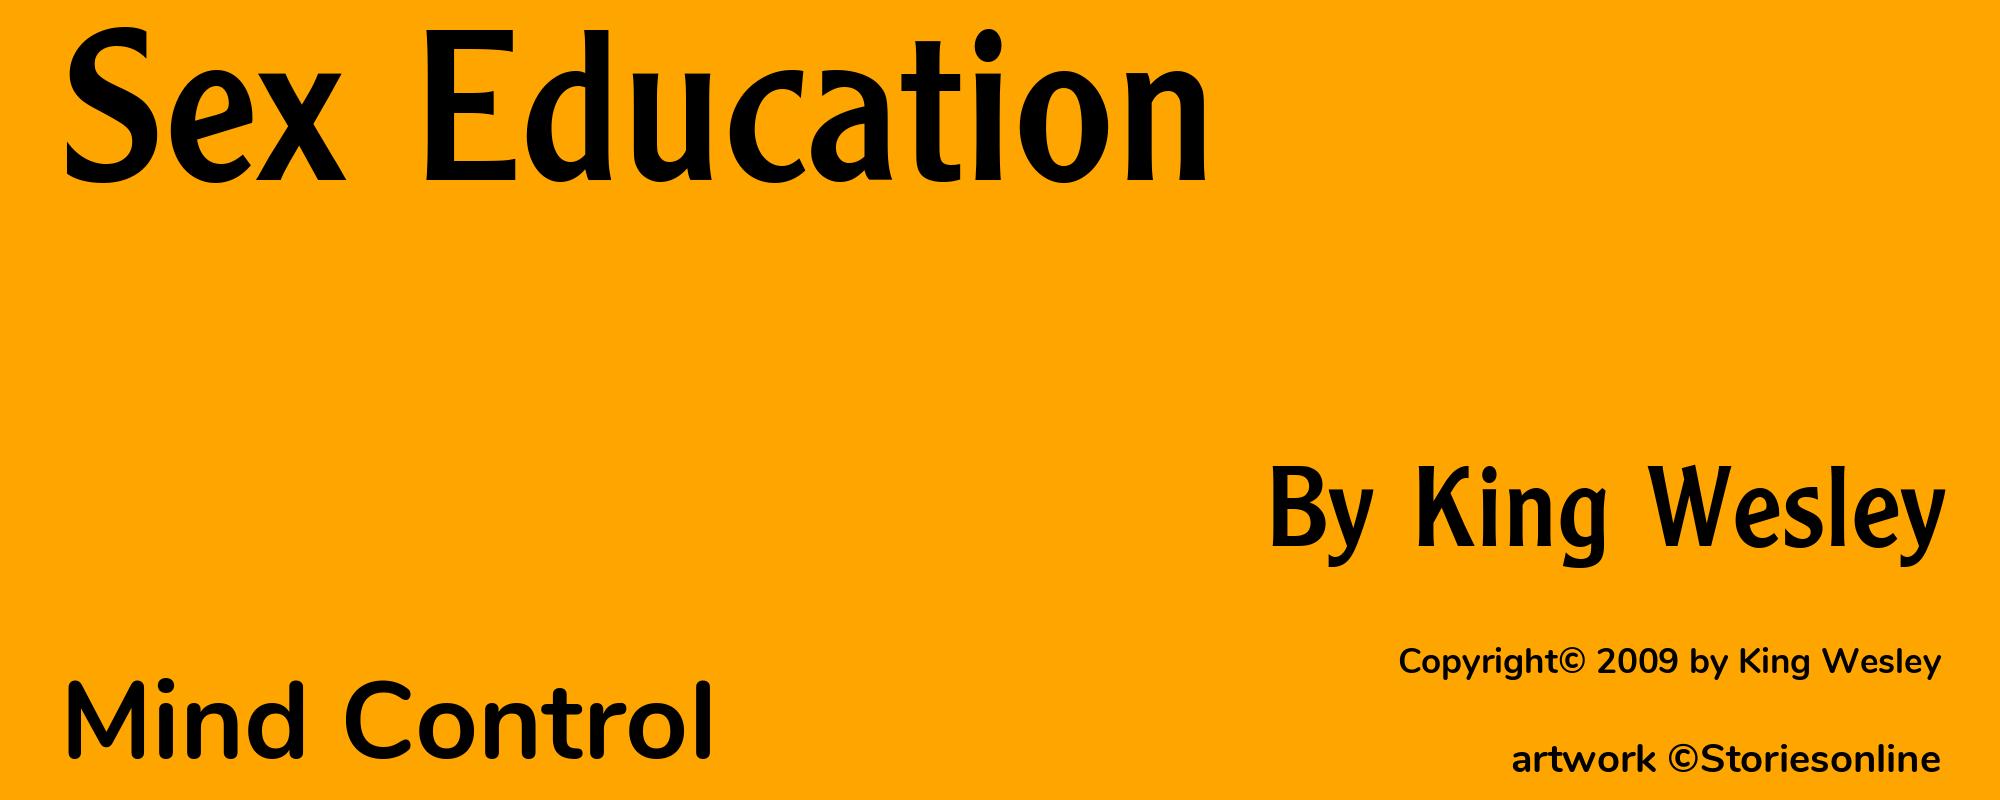 Sex Education - Cover